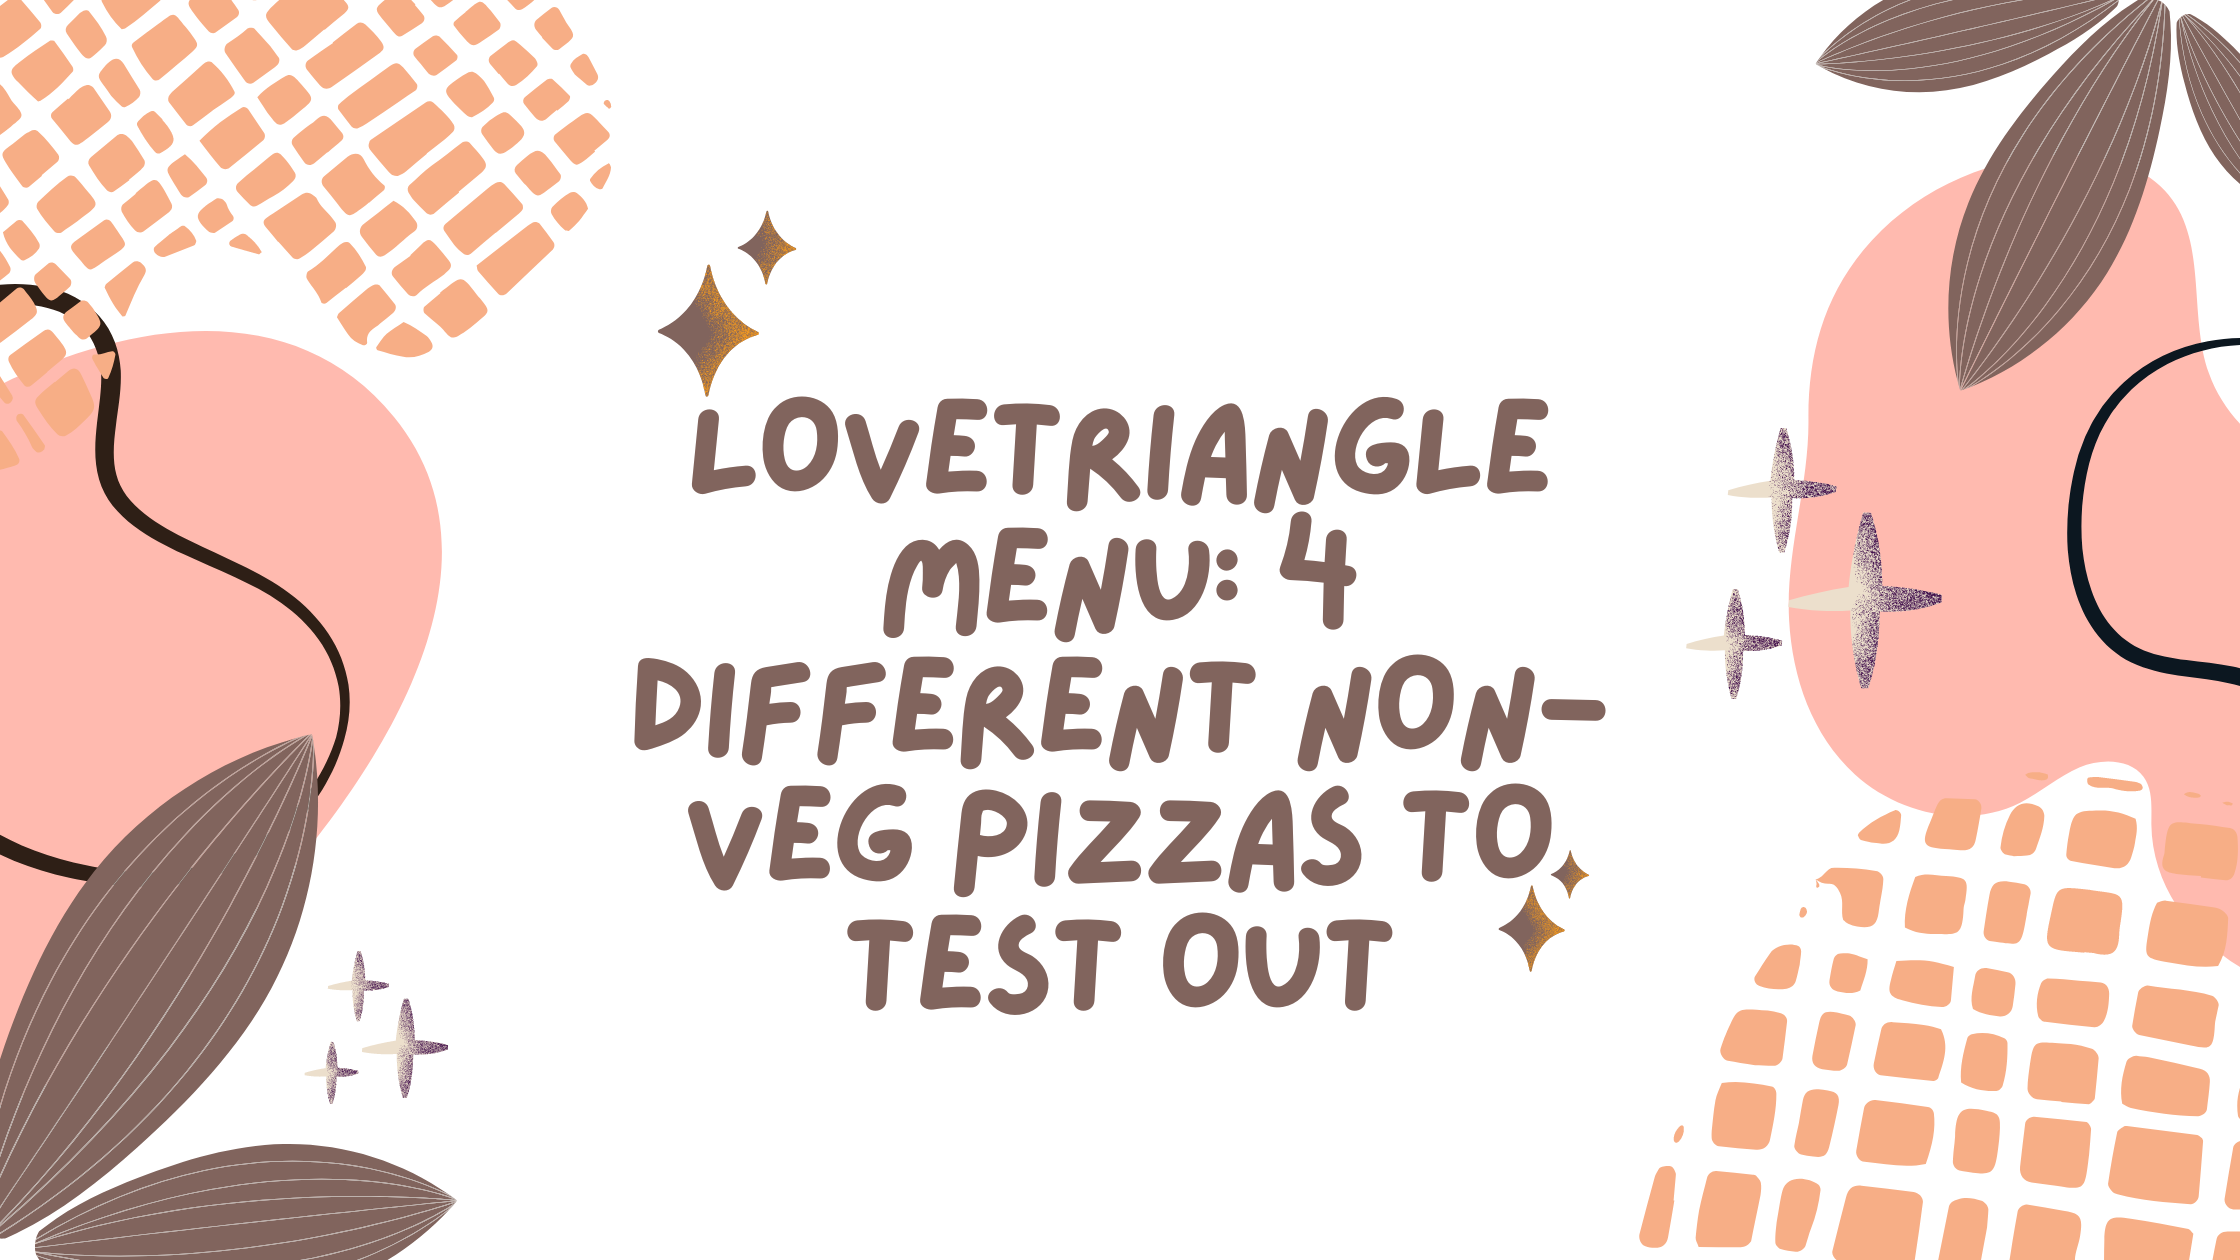 Lovetriangle Menu: 4 Different Non-Veg Pizzas to Test Out